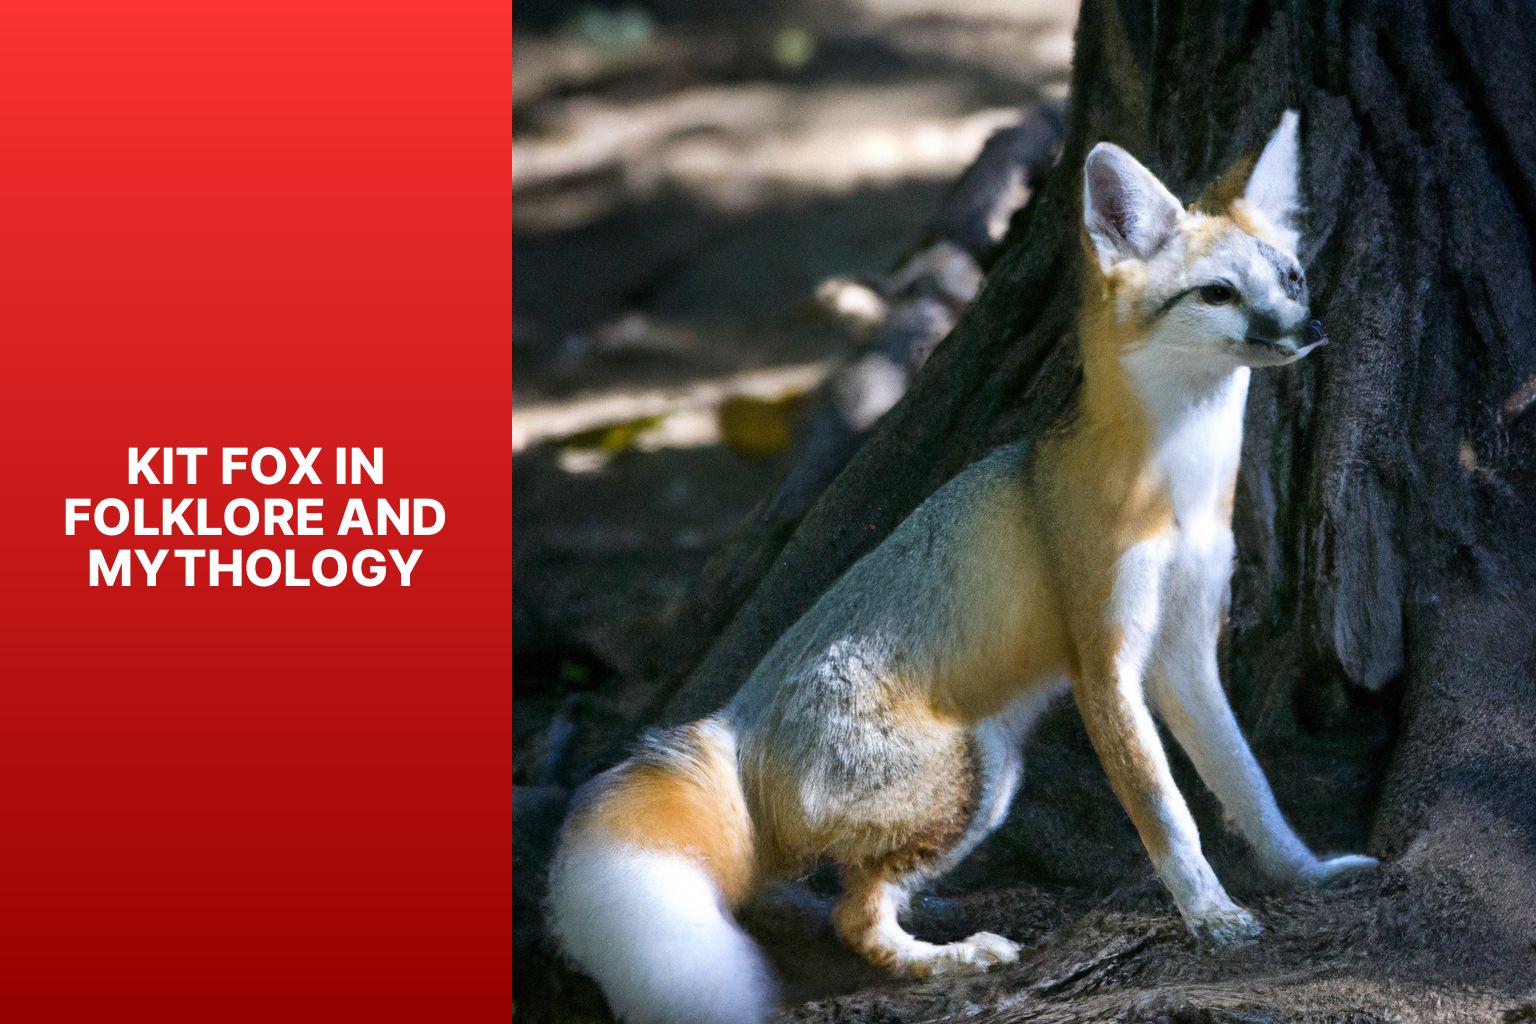 Kit Fox in Folklore and Mythology - Kit Fox in Popular Culture 